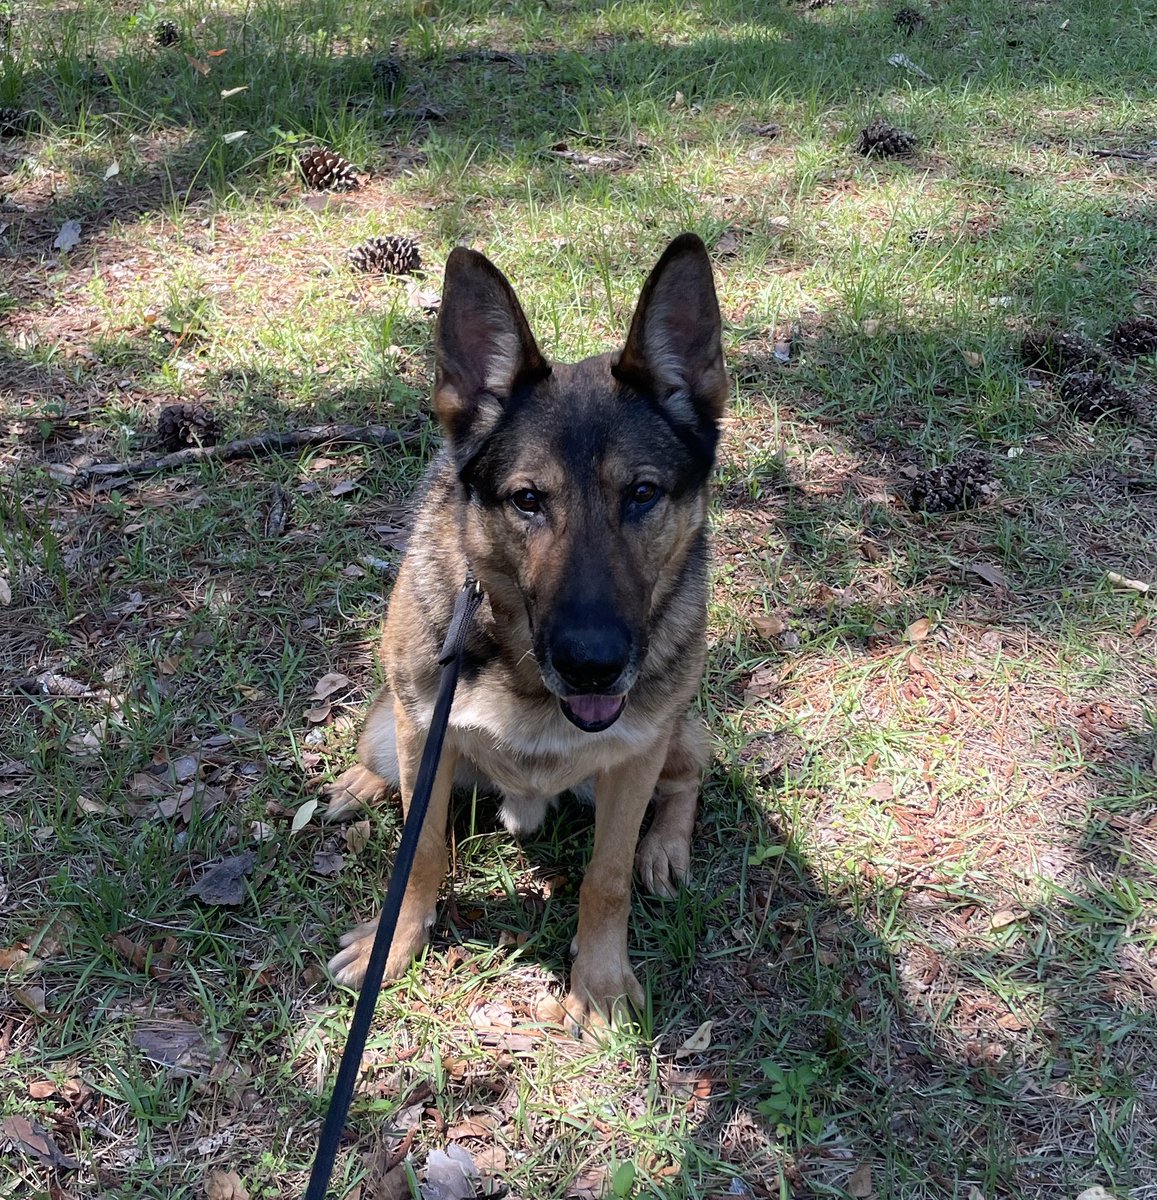 K9 Titan 🤎🖤💚 I always call him “Bigasshead” even though this pic doesn’t reflect the reason it’s his nickname at all! But he has a giant head and giant paws, biggest I’ve ever personally seen. 🤣